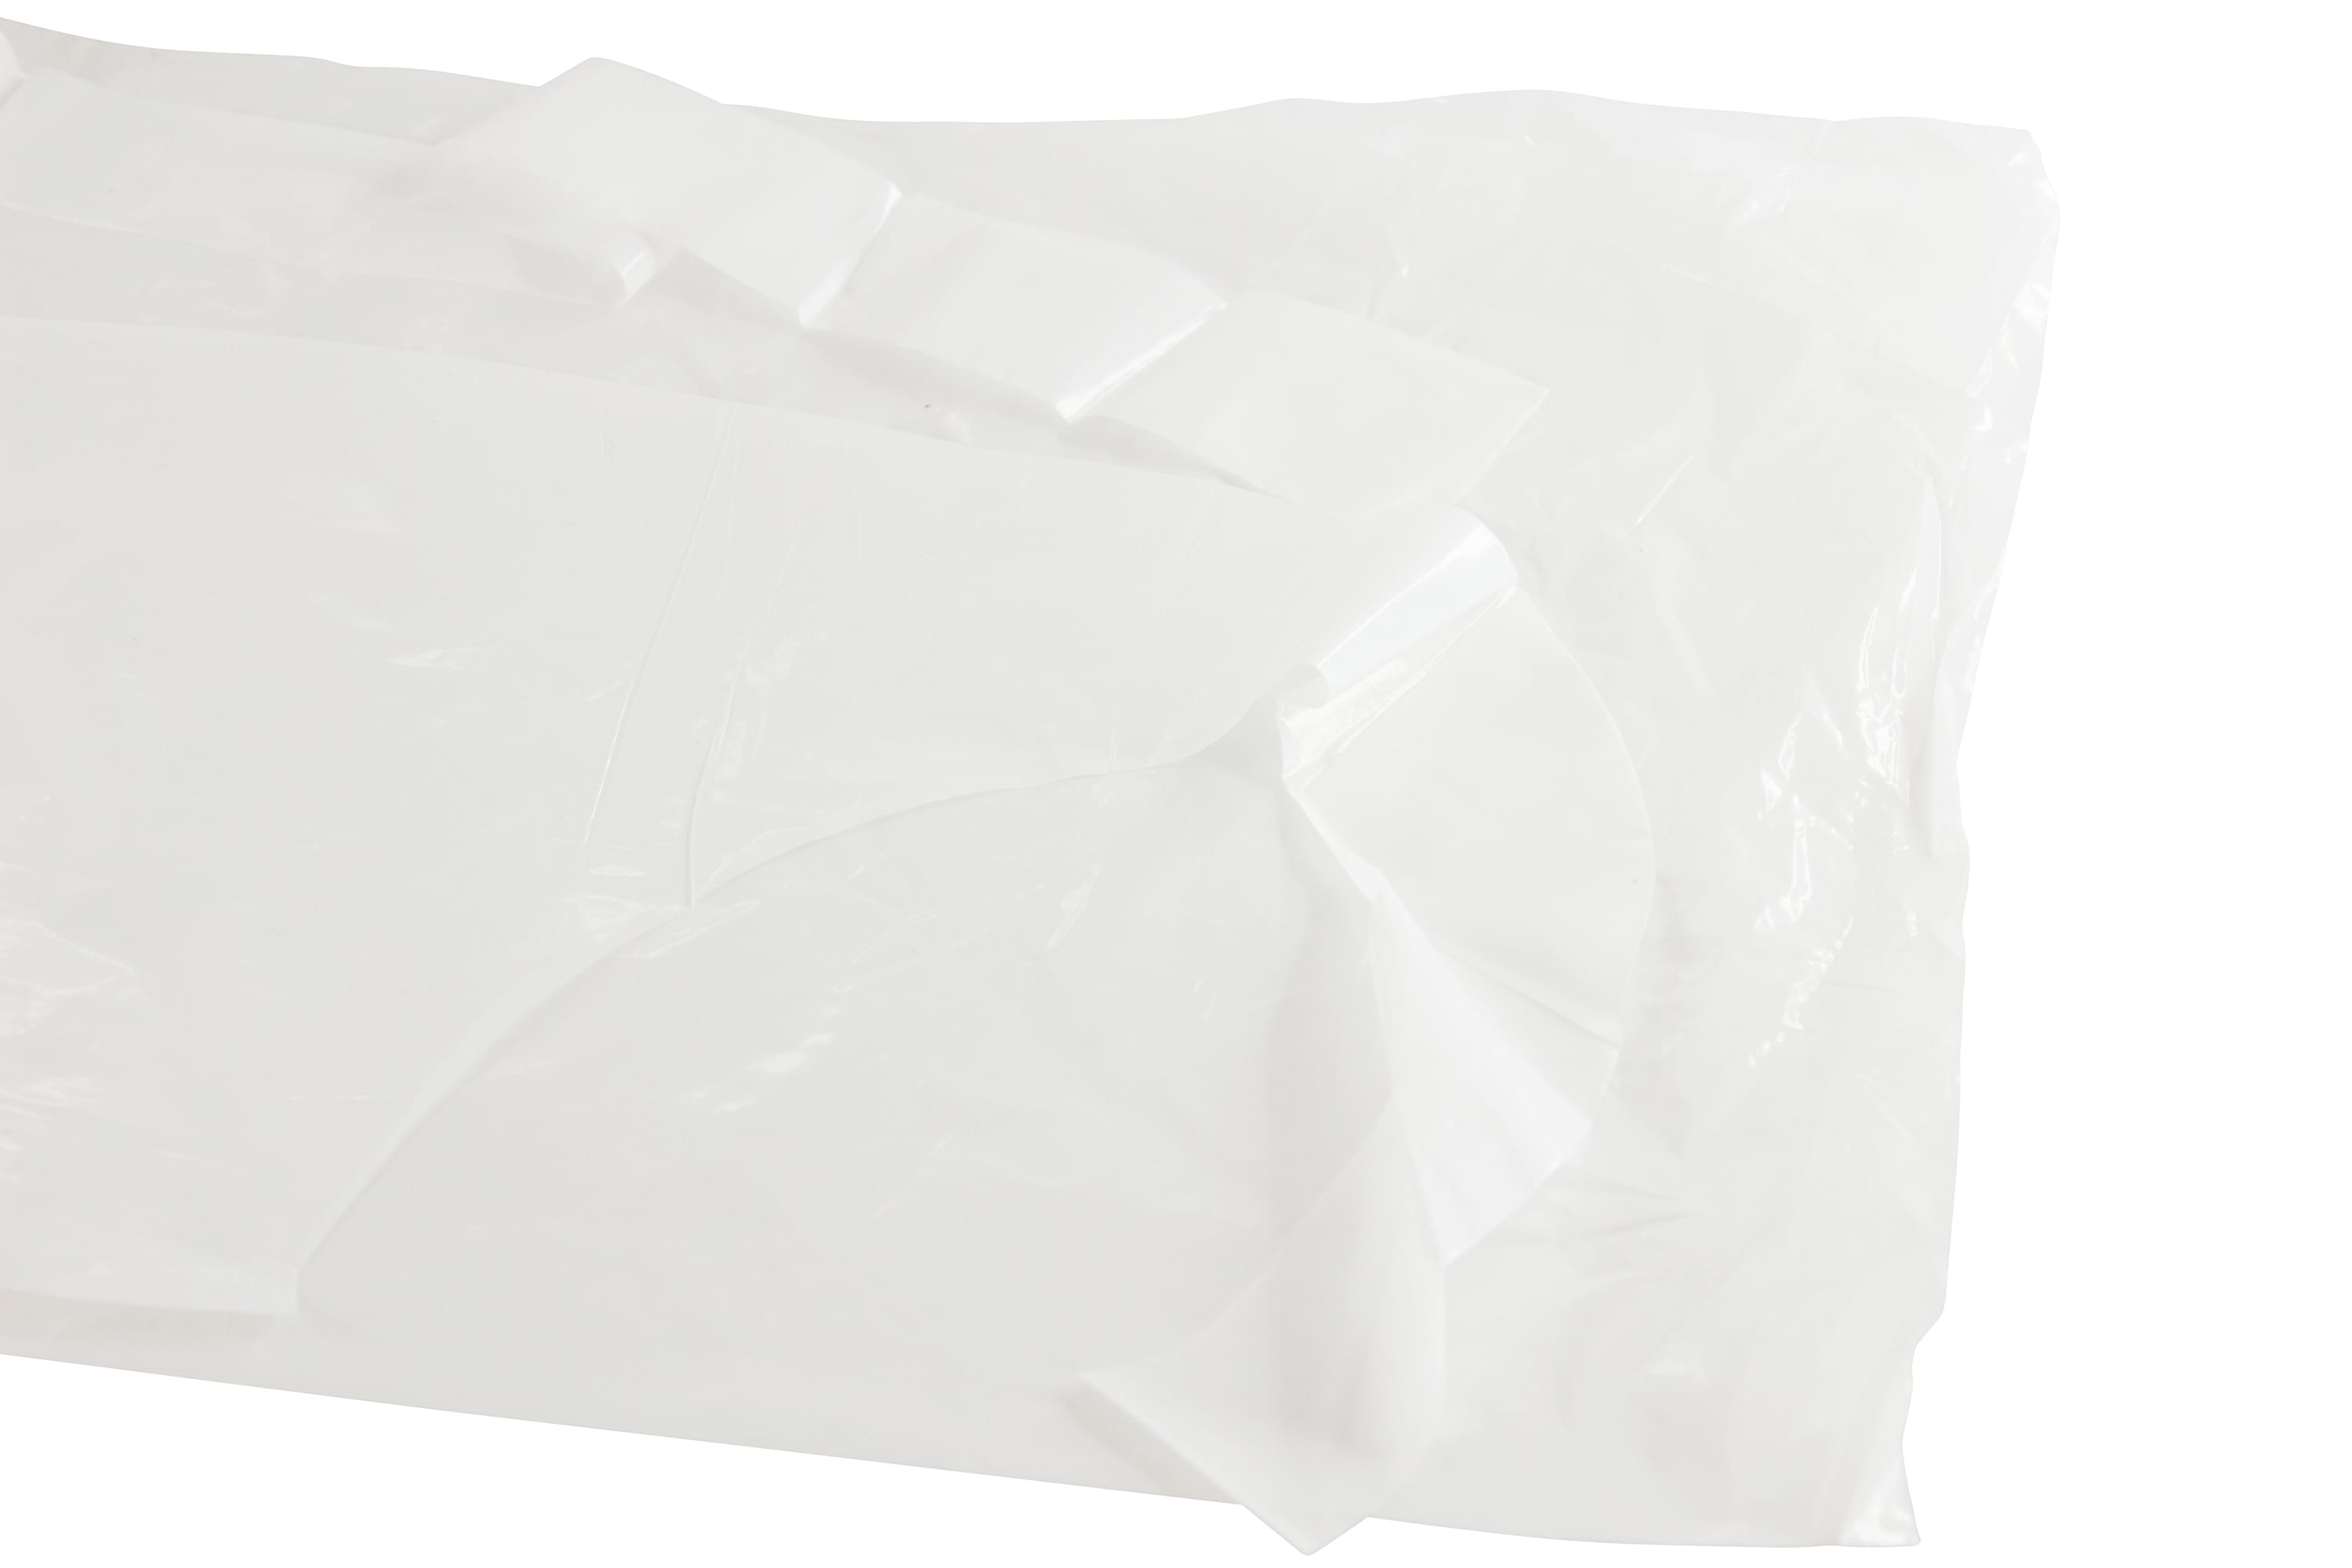 White Disposable Aprons / Bibs, 1mil, 100 Pack